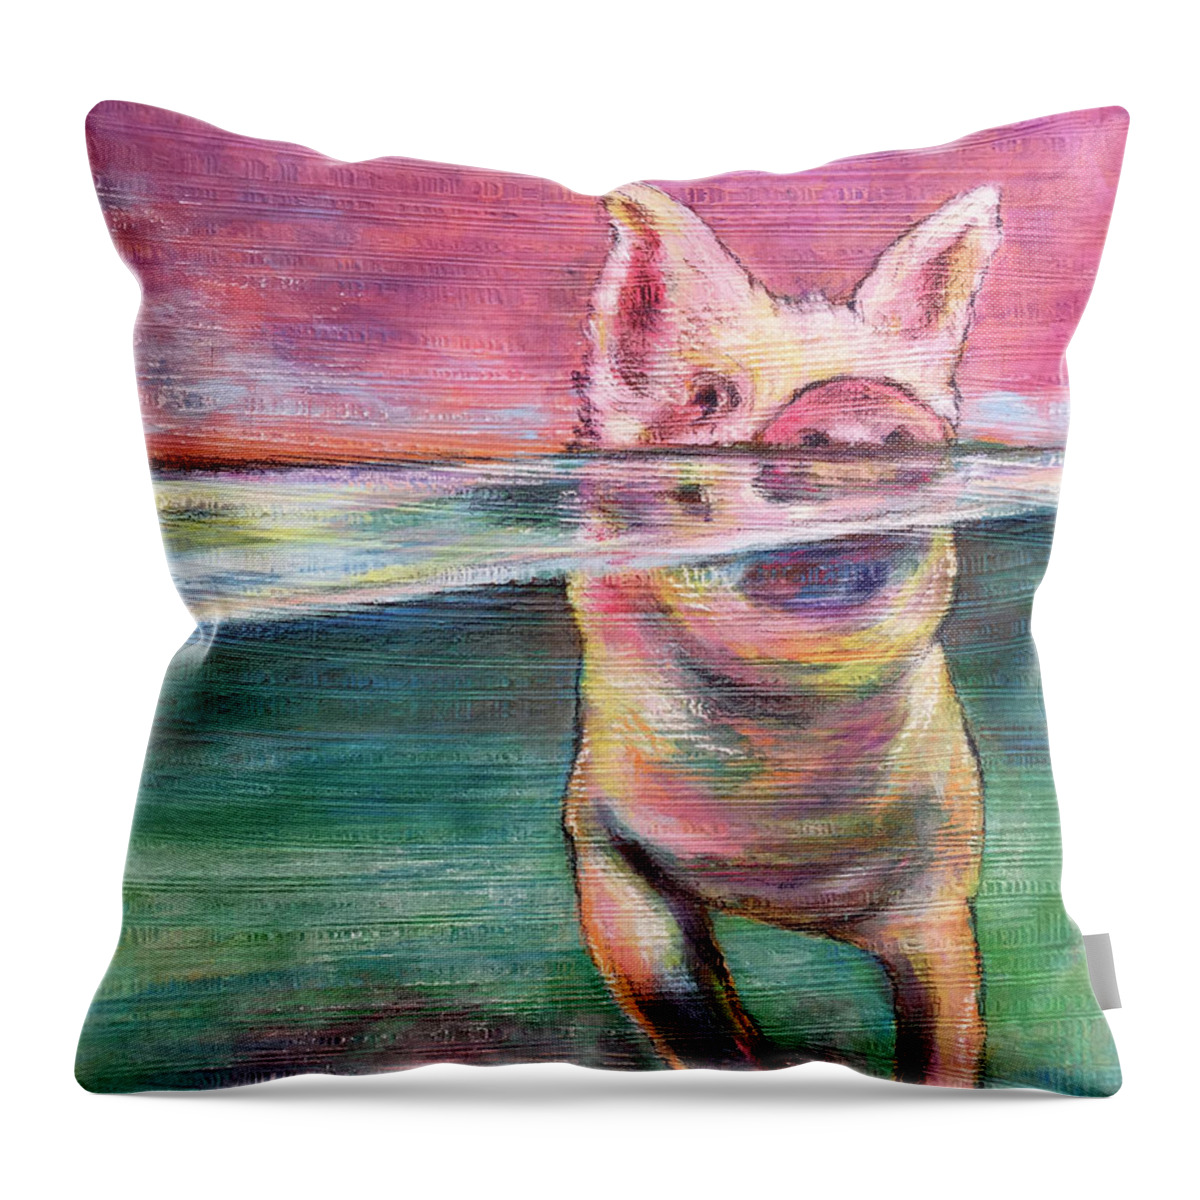 Pig Throw Pillow featuring the mixed media Swimming Pig by AnneMarie Welsh